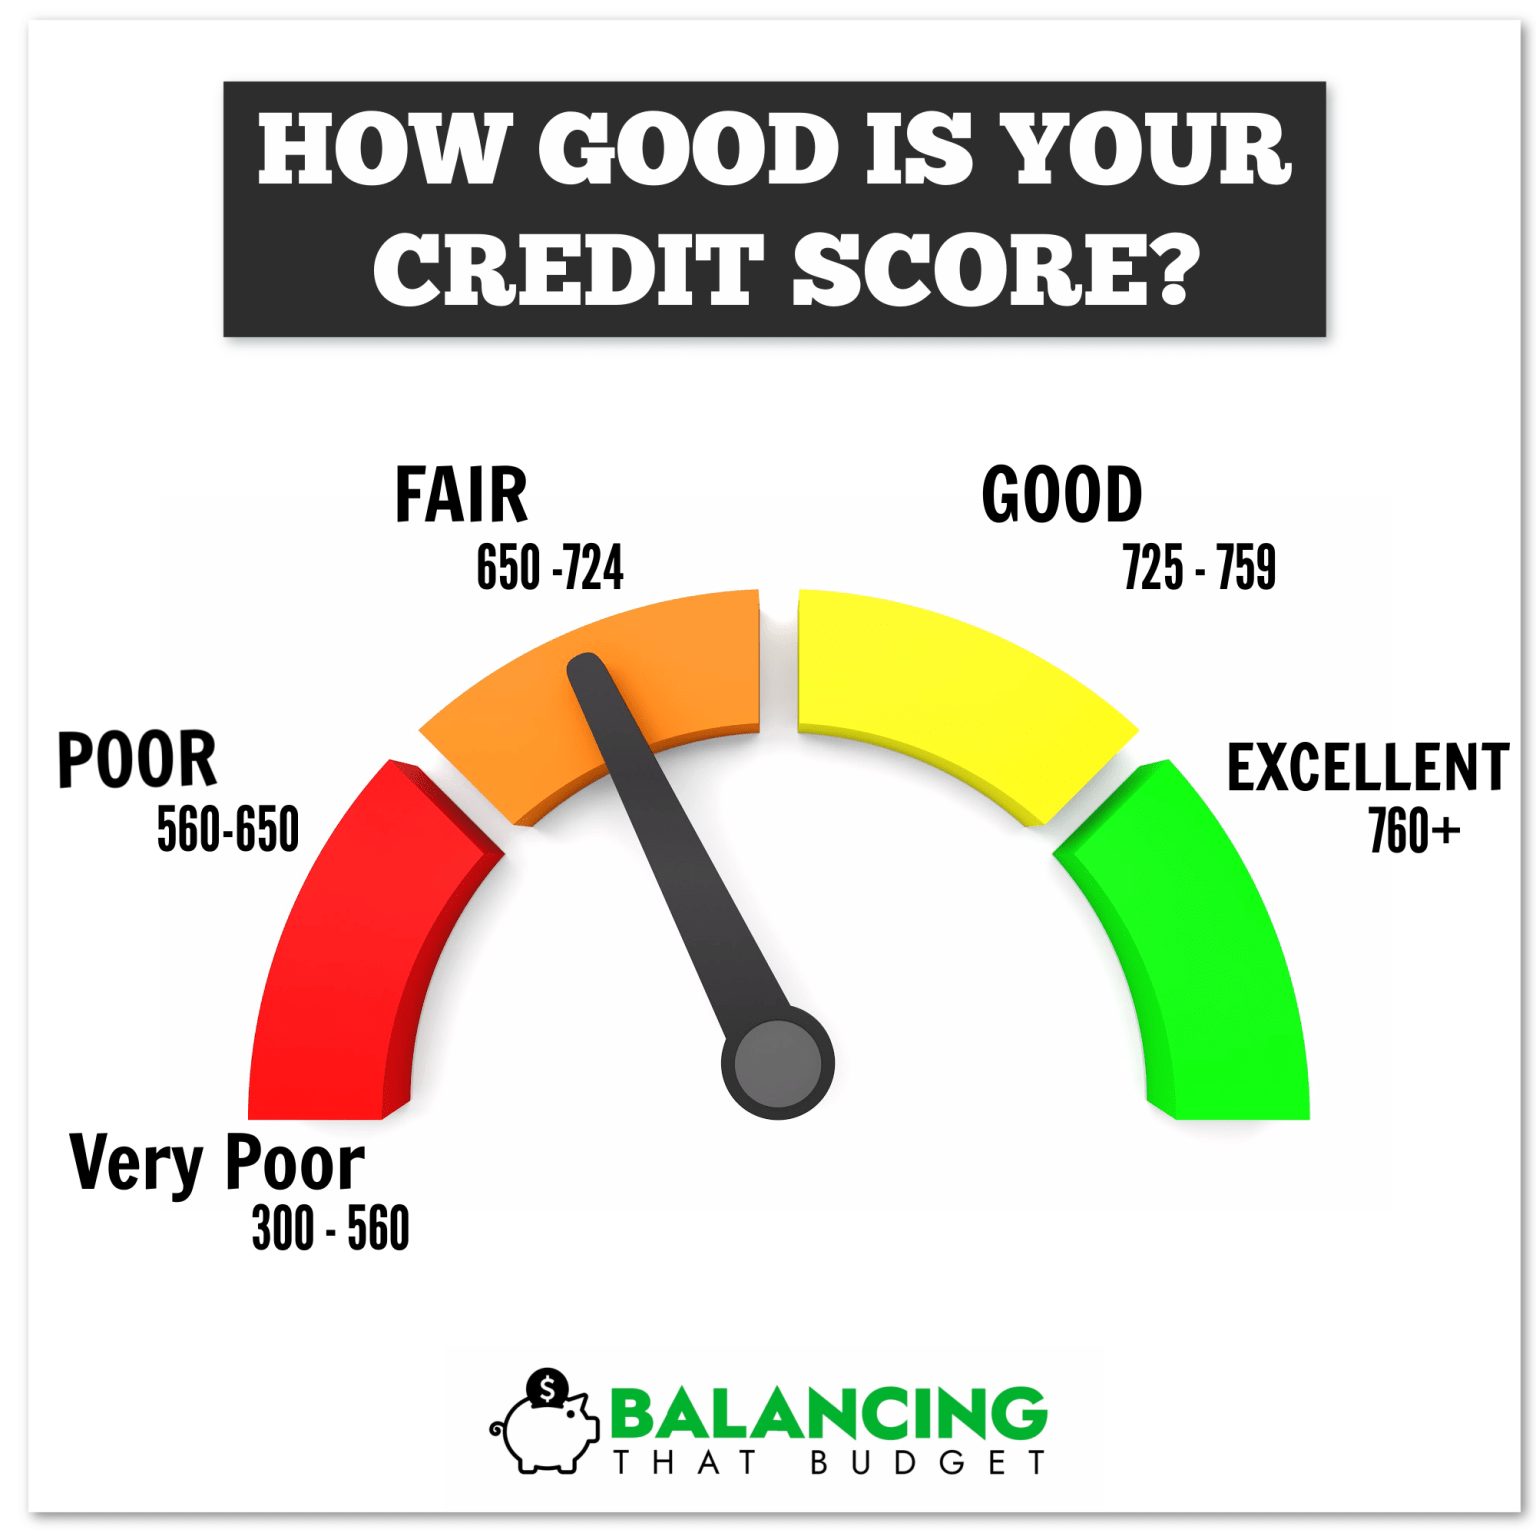 WHAT IS A GOOD CREDIT SCORE IN CANADA